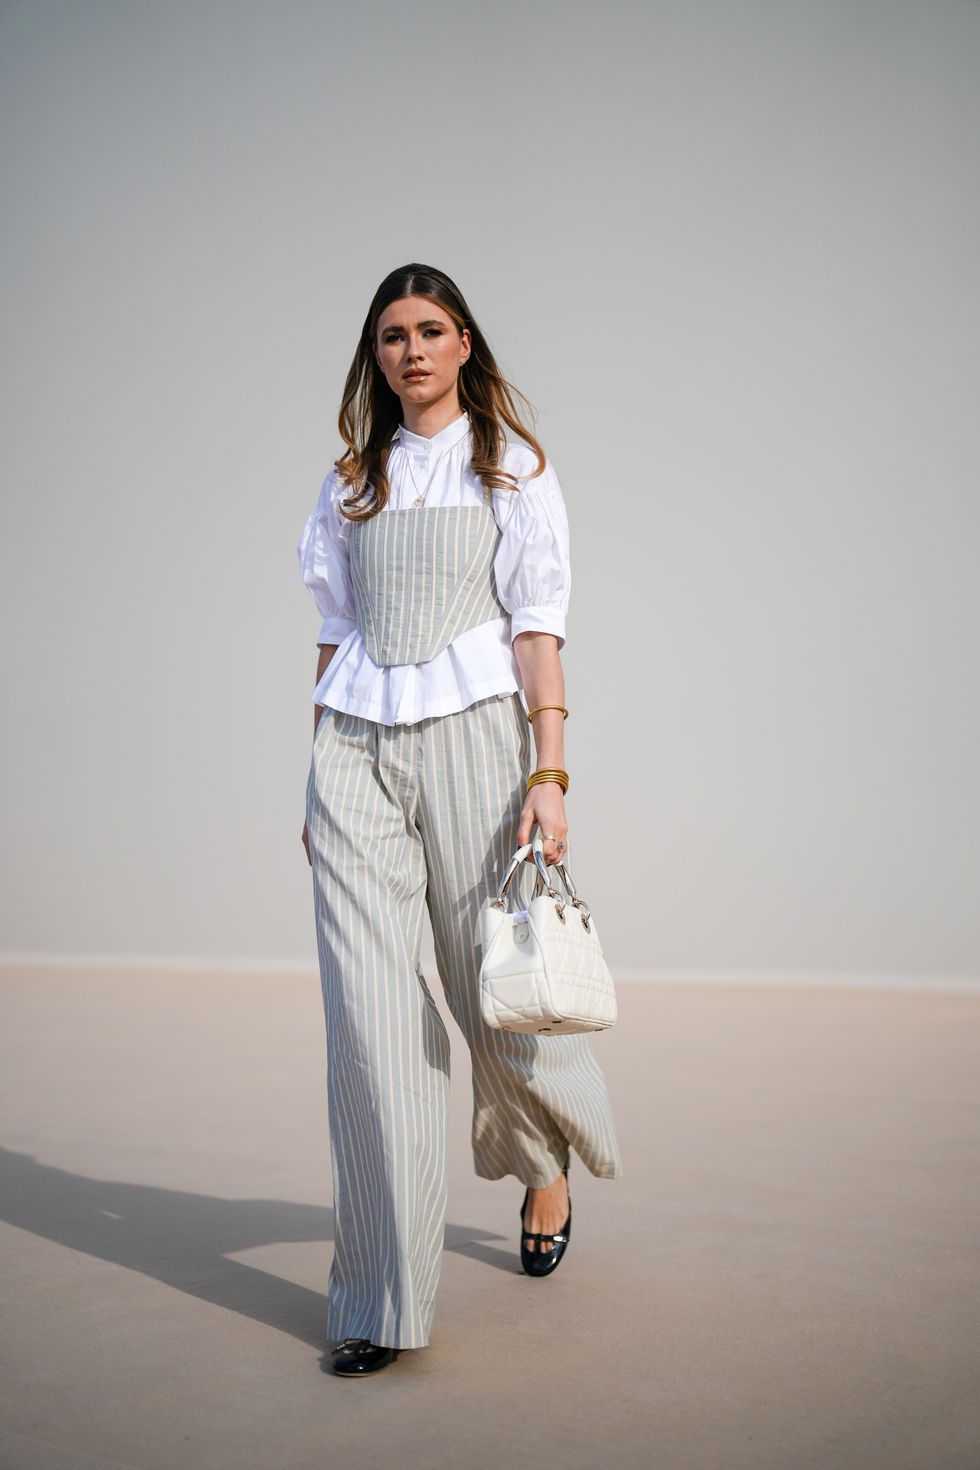 How I Conquered a Business Casual Fashion Rut